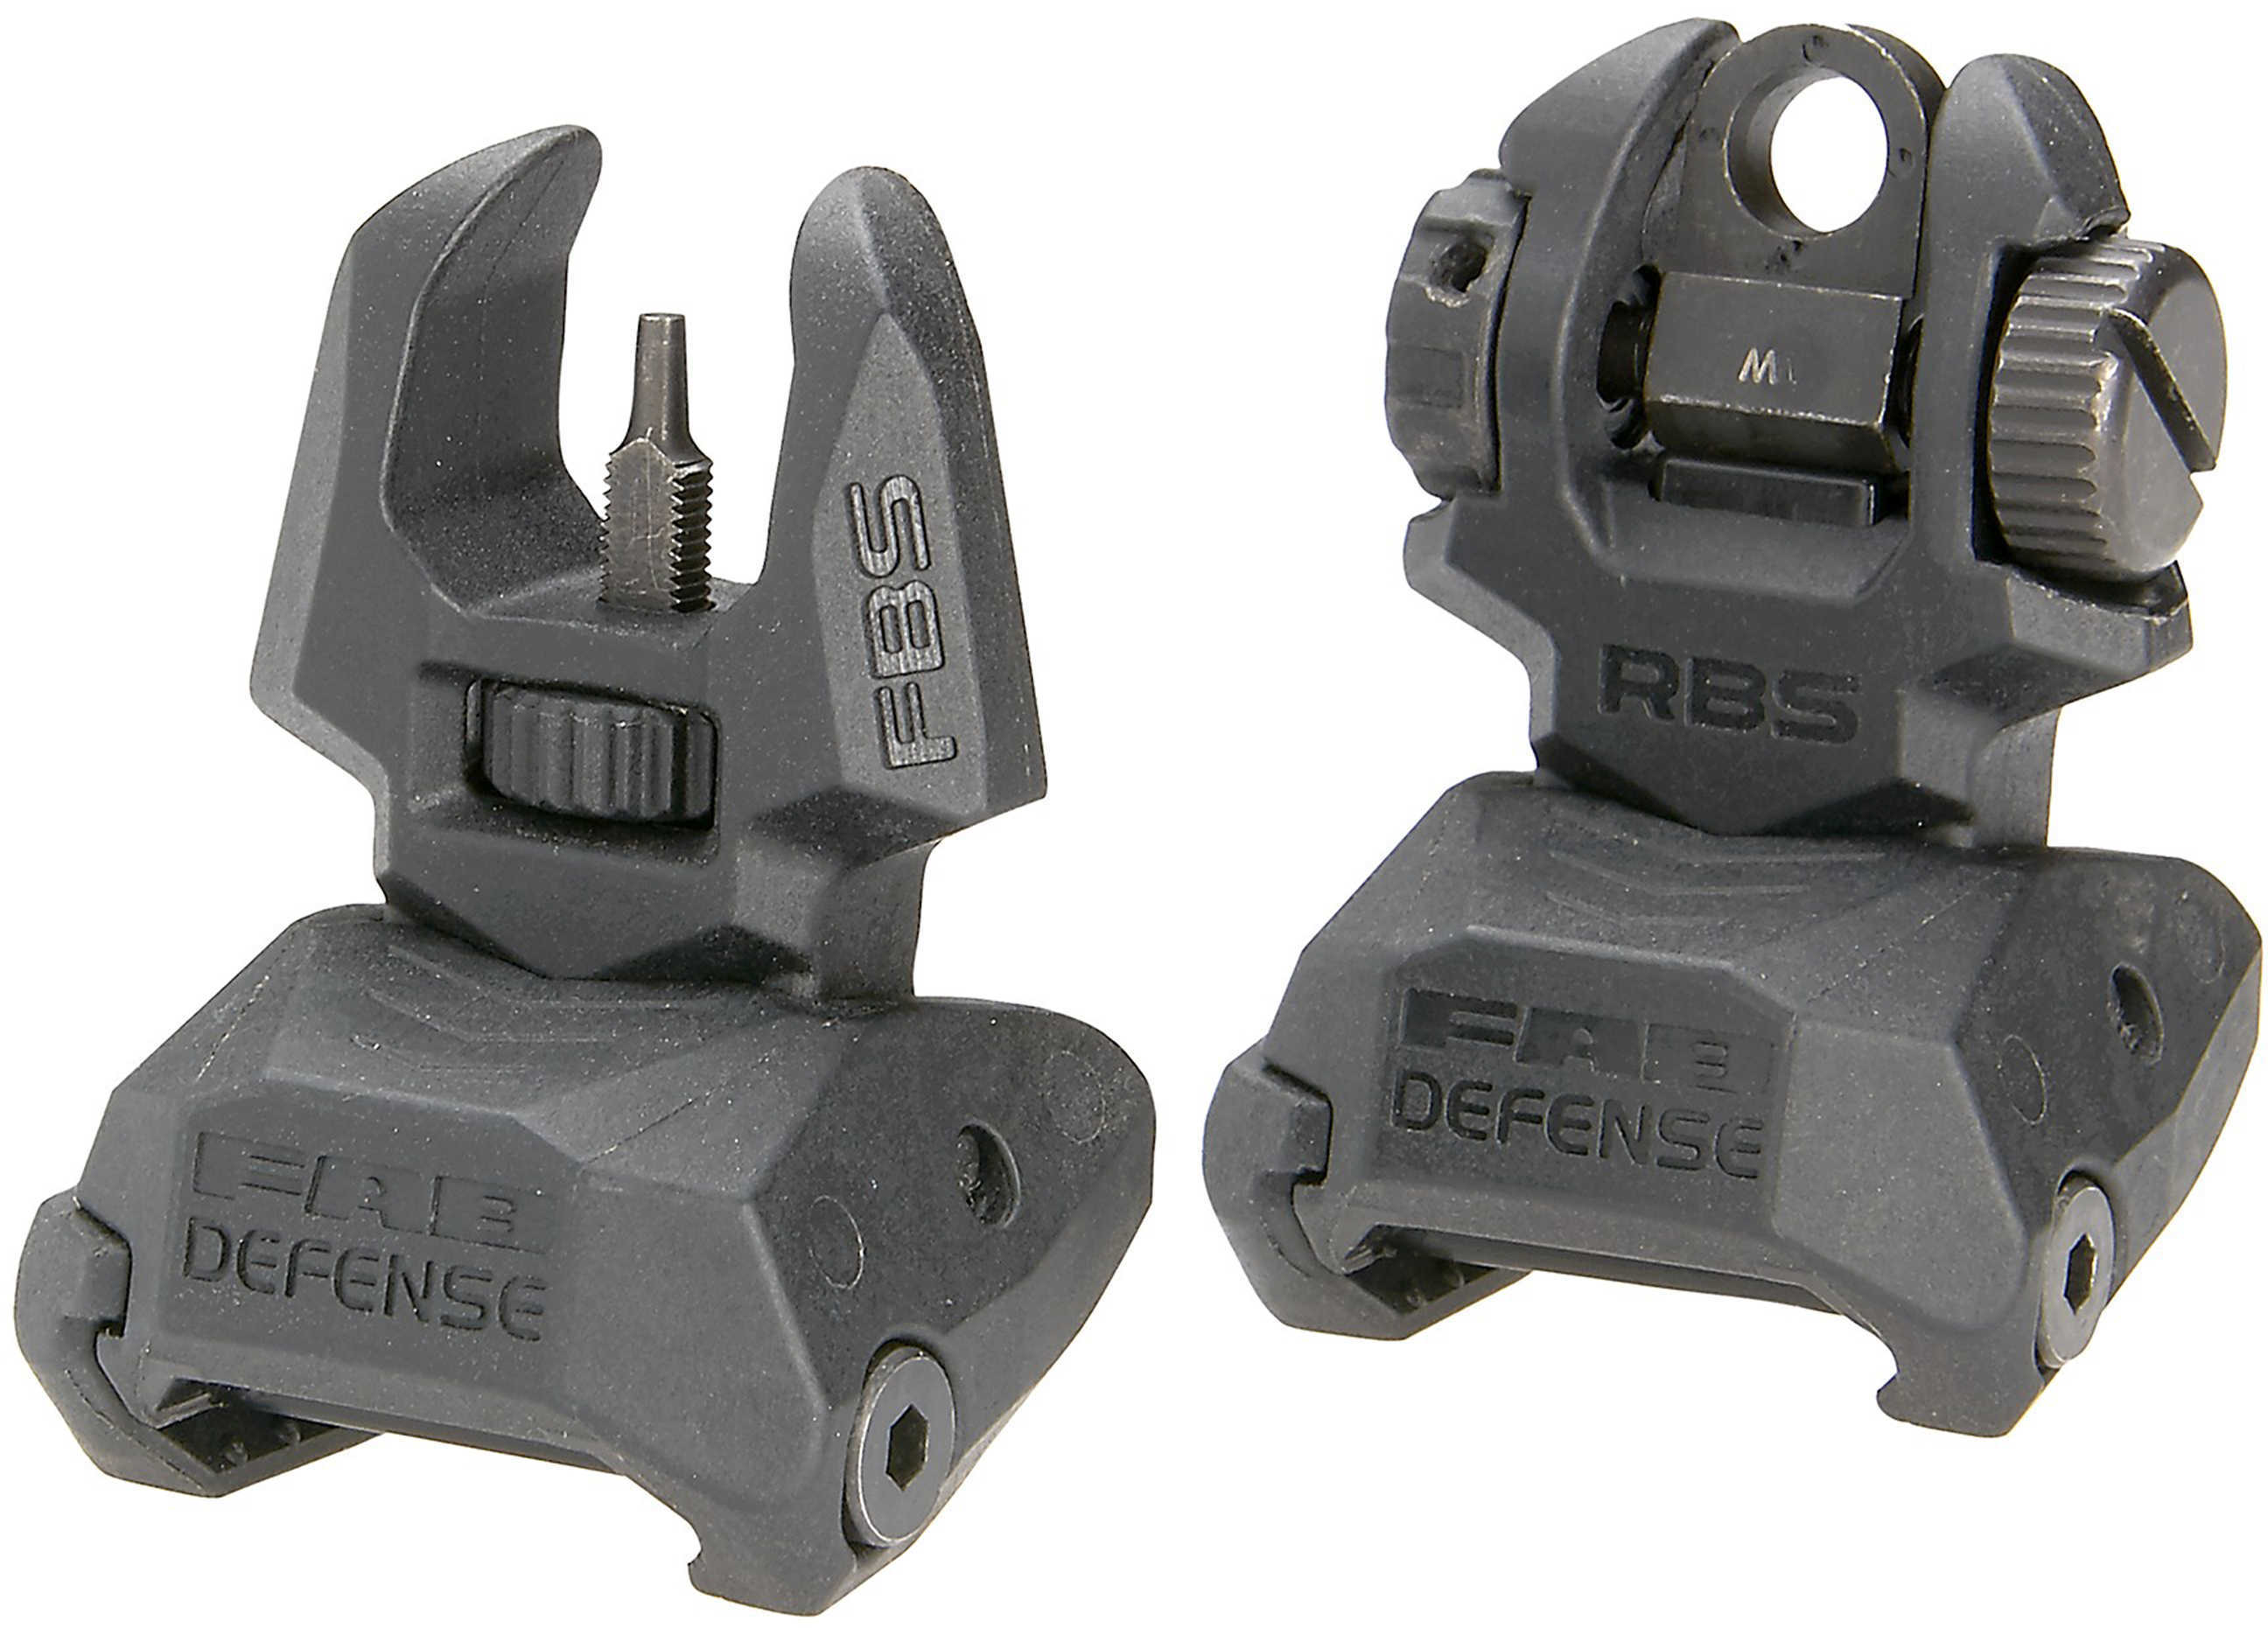 Mako Group Front And Rear Set Of Flip-up Sights With Tritium - 4 Dots